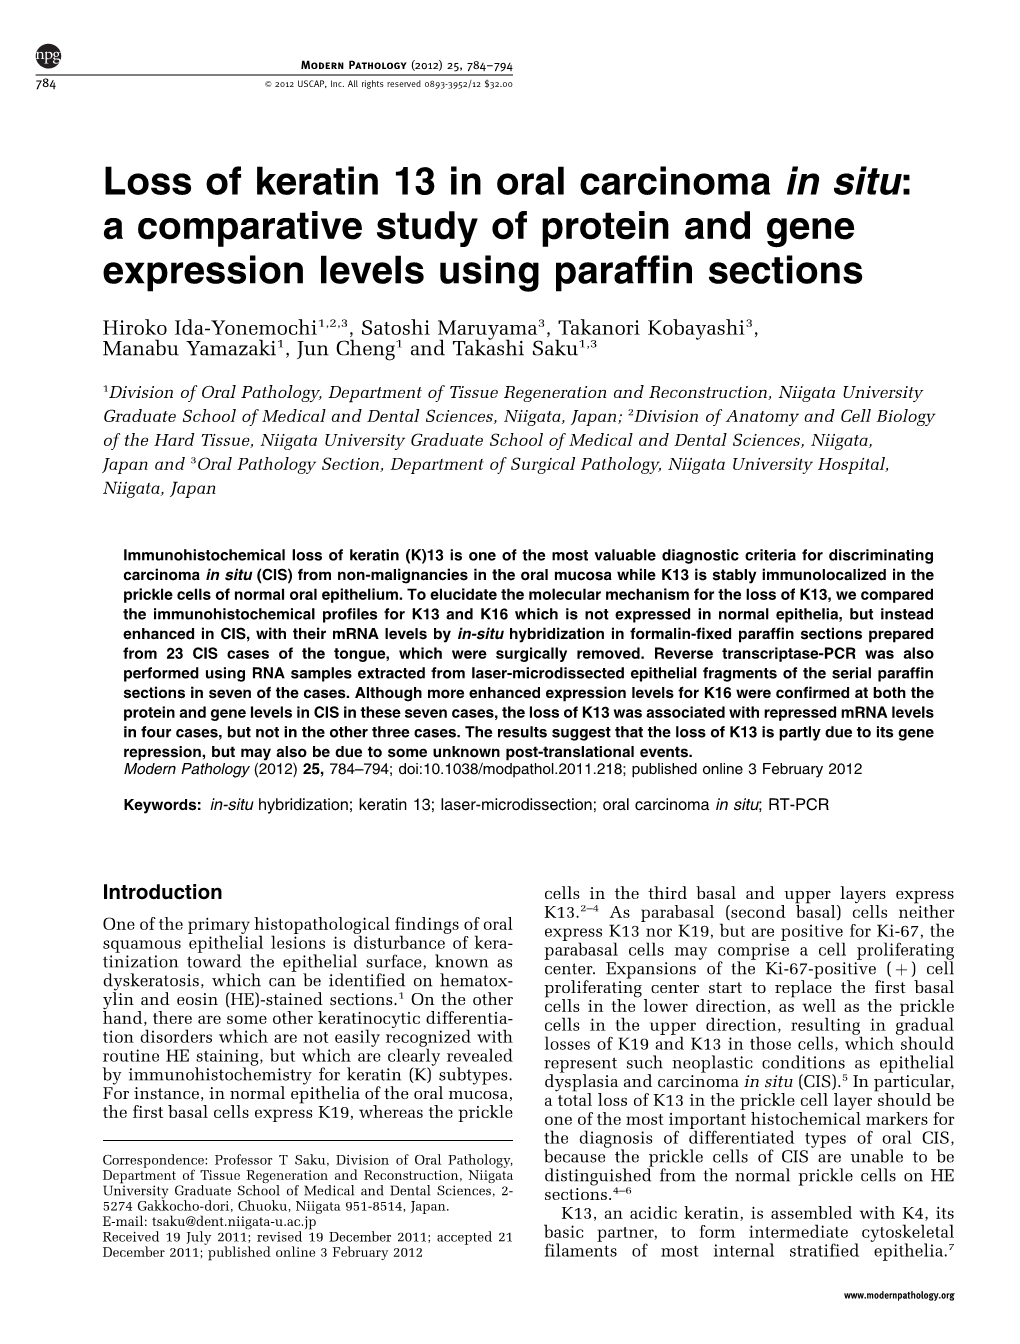 Loss of Keratin 13 in Oral Carcinoma in Situ: a Comparative Study of Protein and Gene Expression Levels Using Paraffin Sections